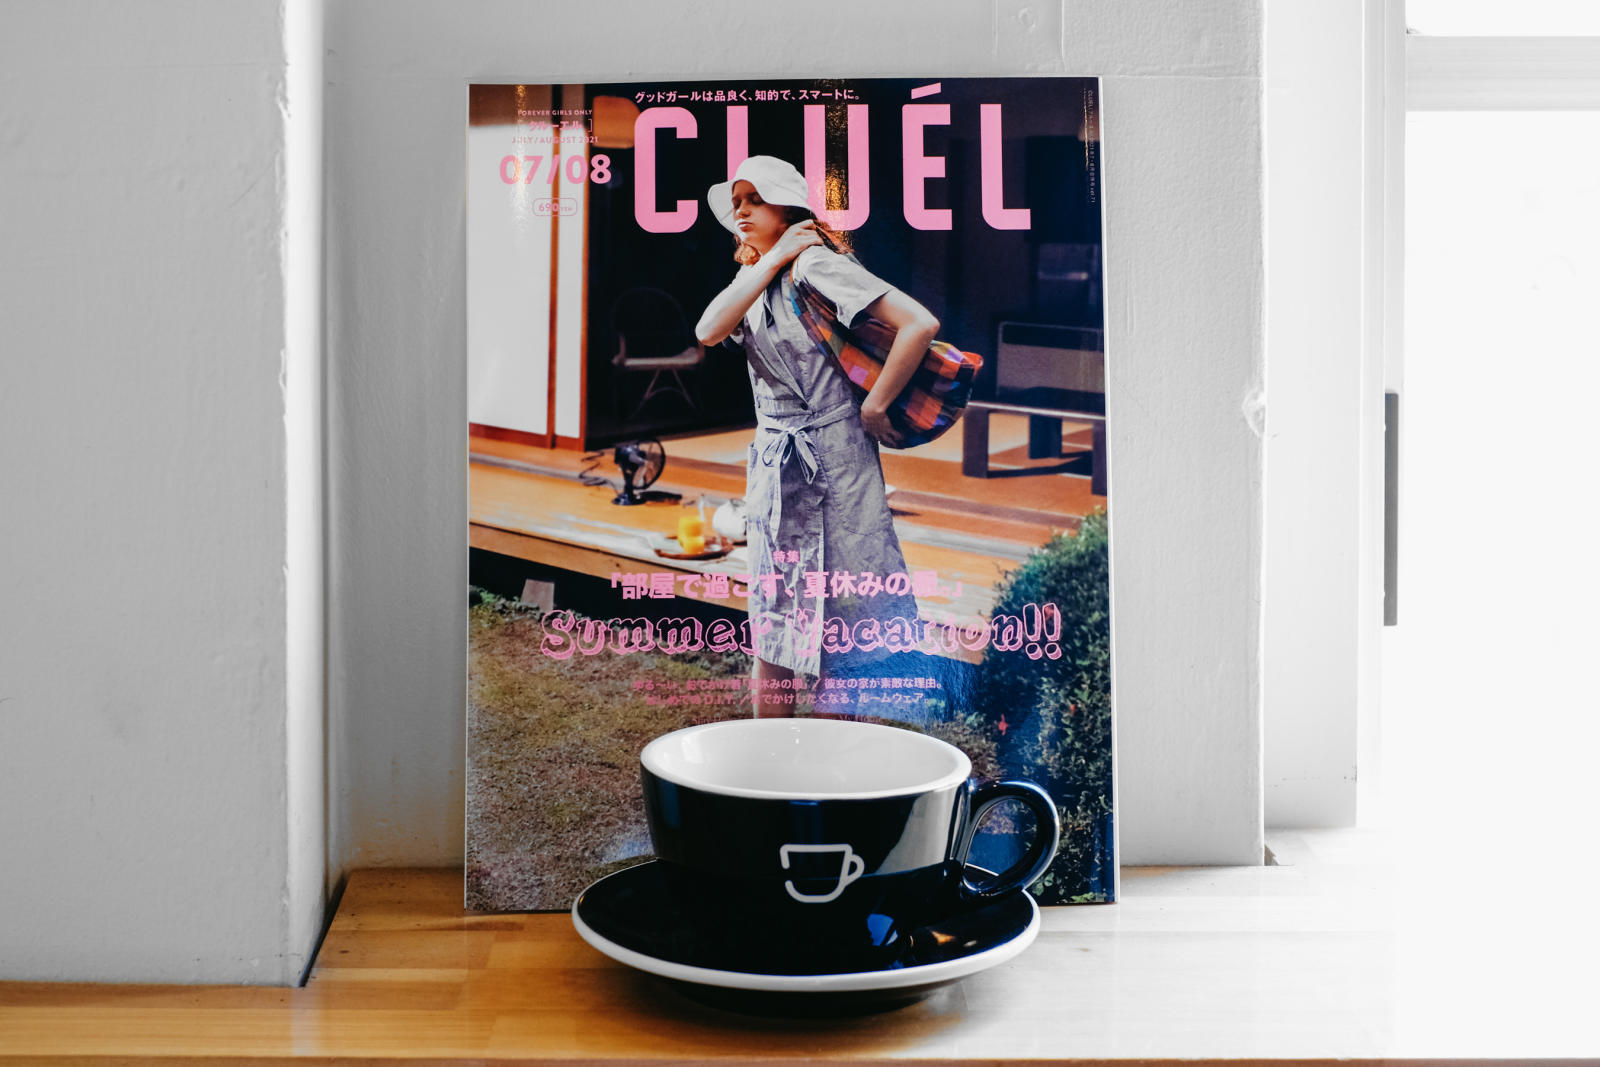 Howlt Coffee Mugs Featured in CLUEL Magazine